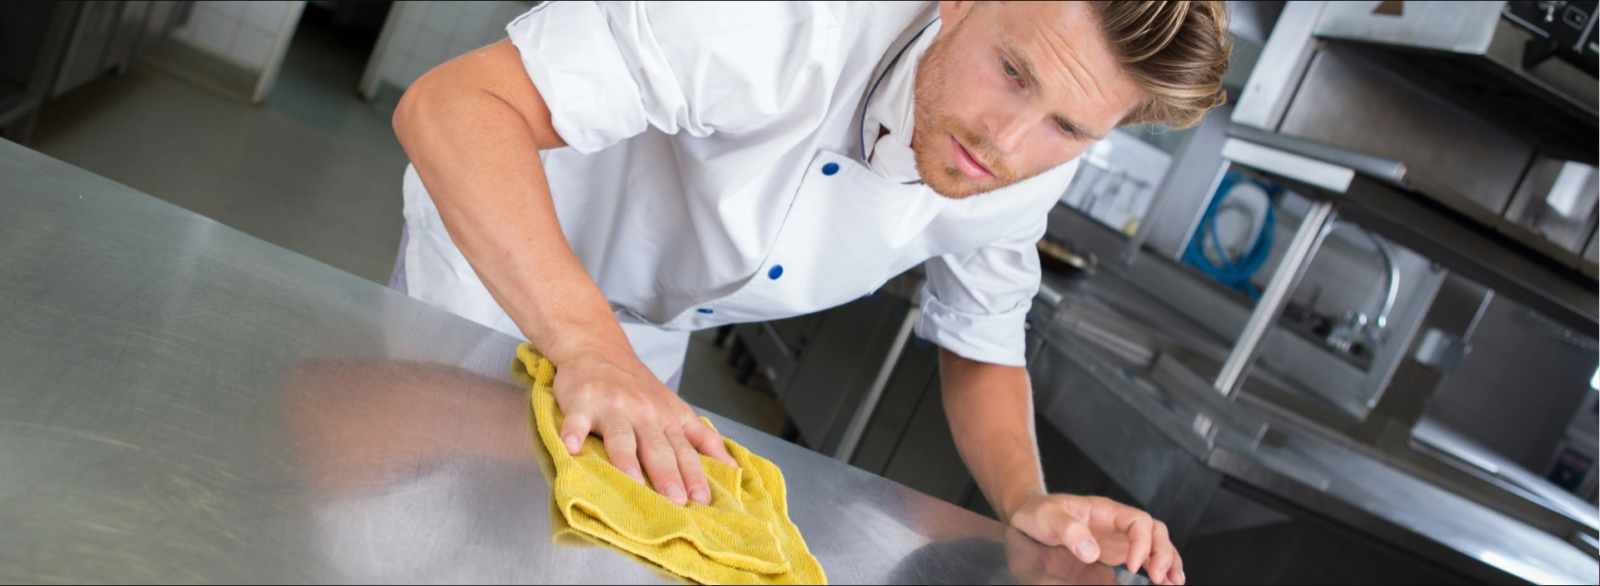 How to Tell If a Restaurant Is Clean and Hygienic 